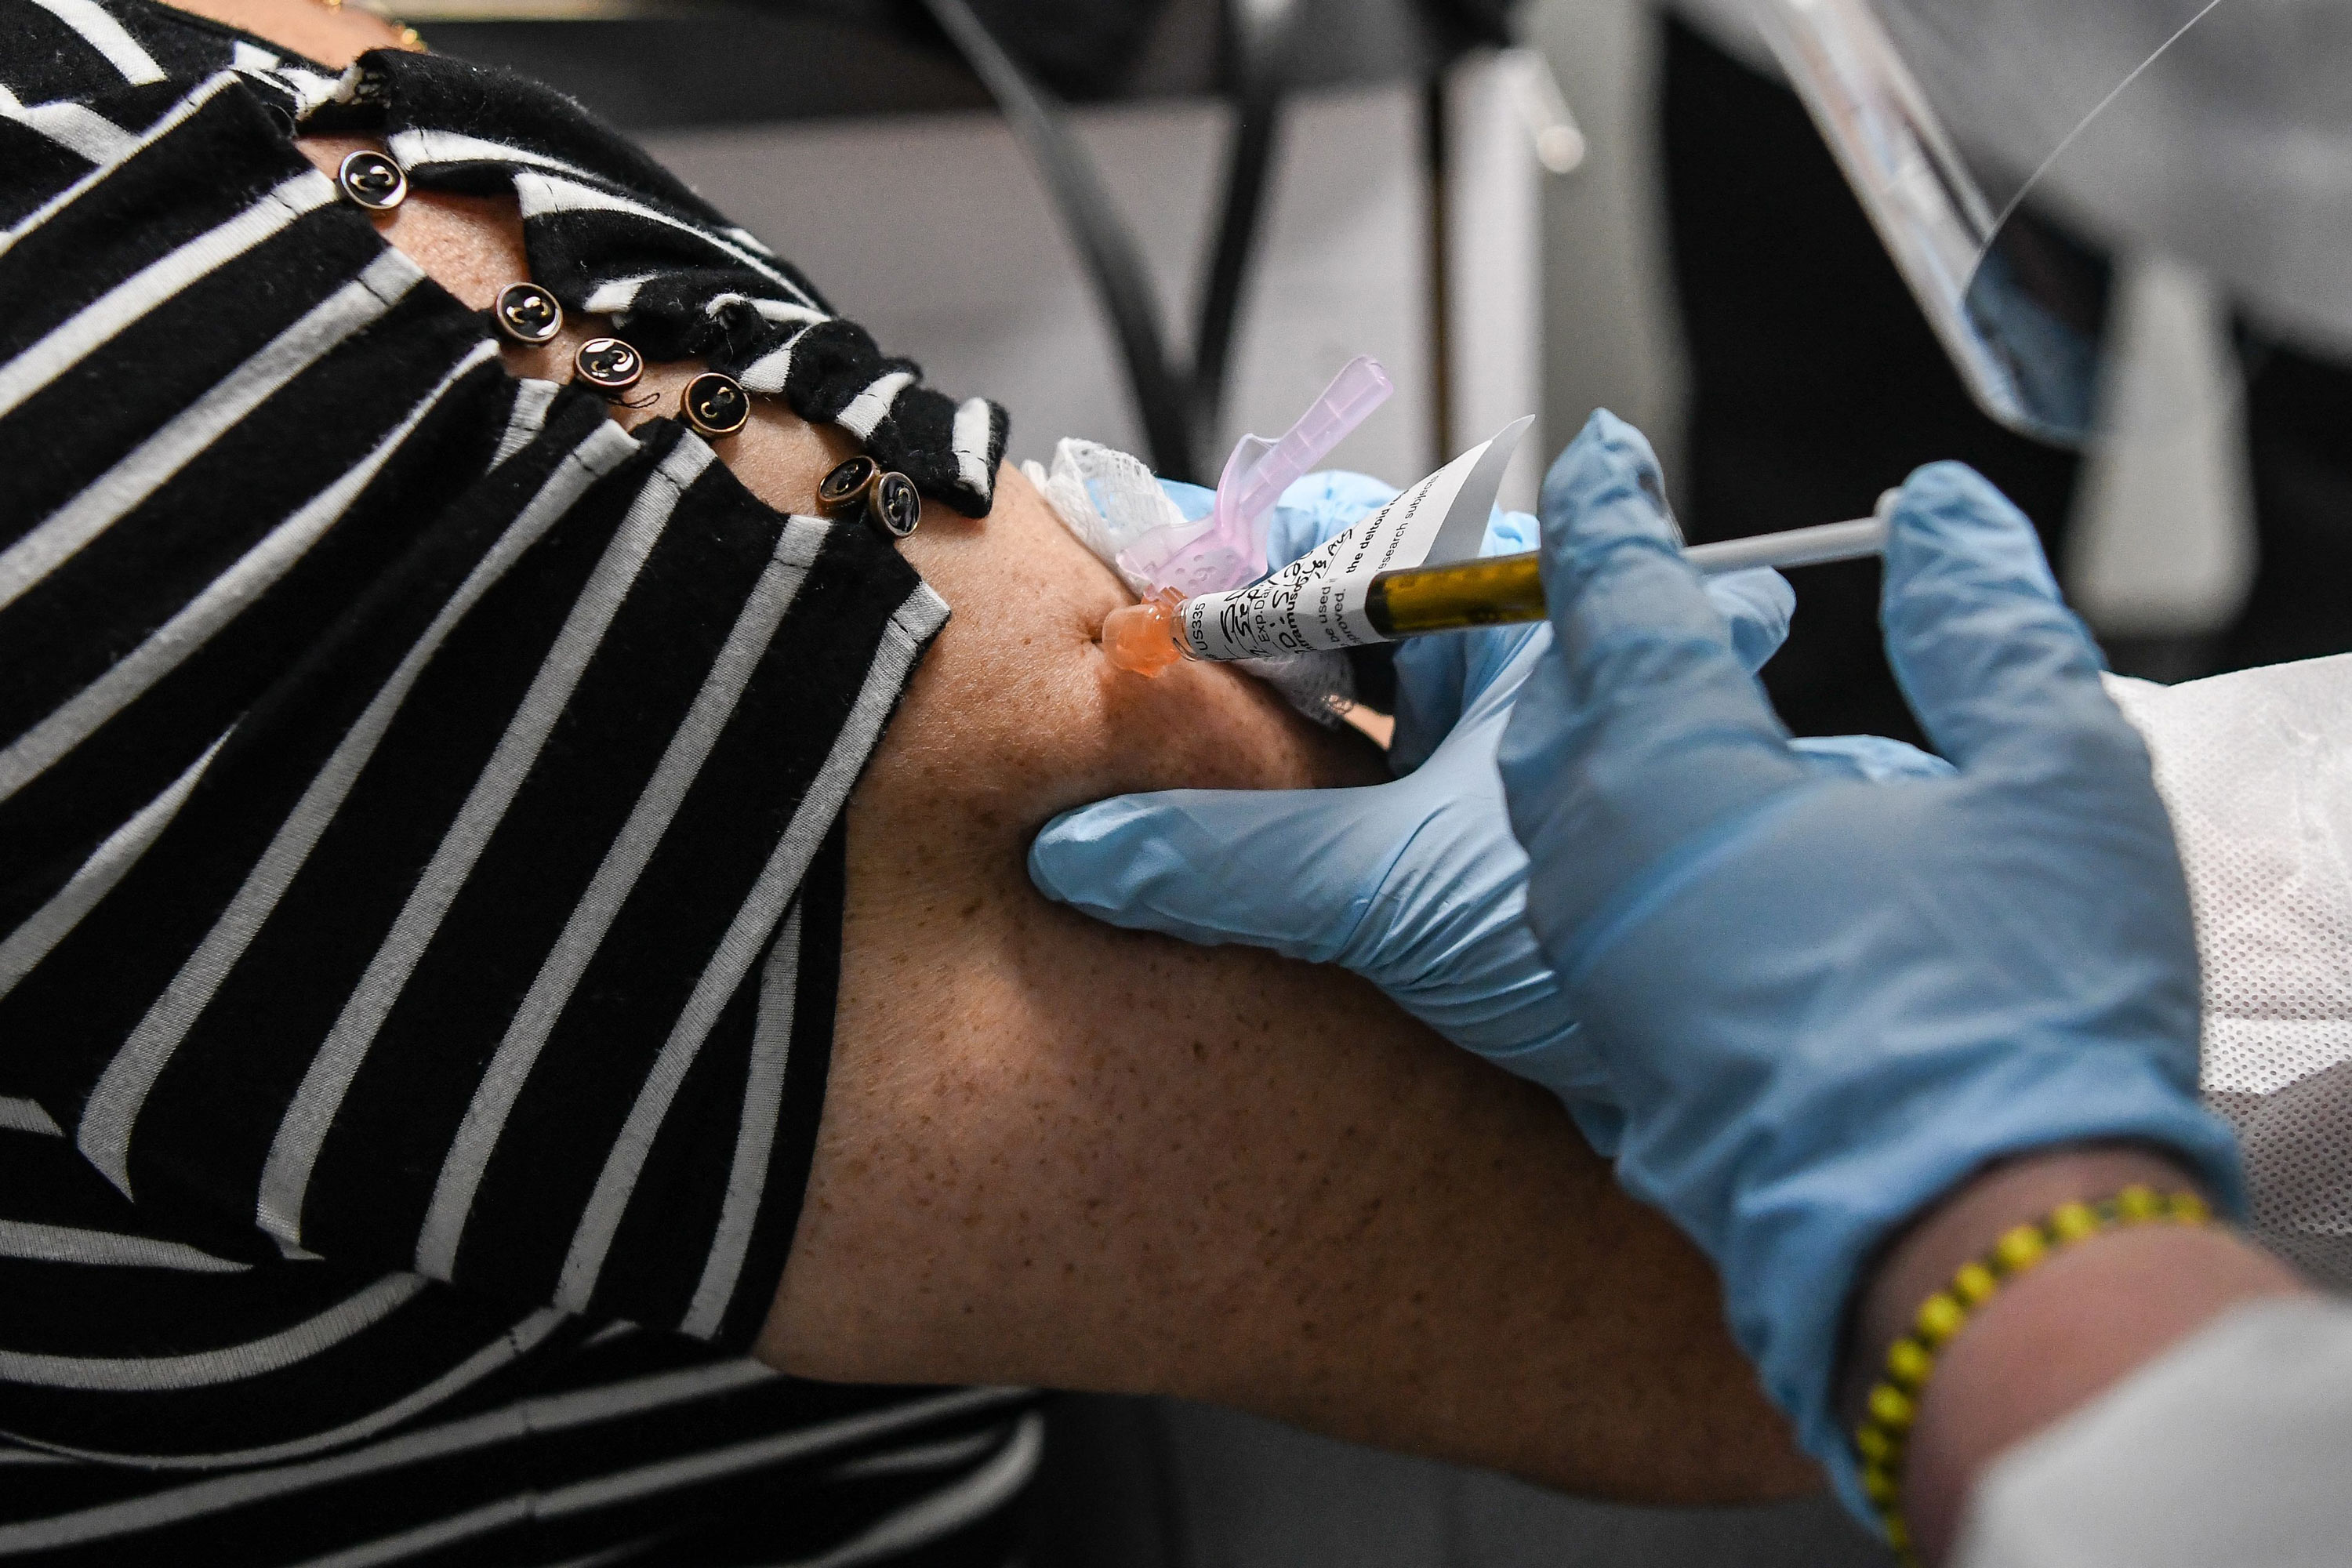 A person receives an injection during a clinical trial for a COVID-19 vaccine at the Research Centers of America in Hollywood, Florida, on August 13.